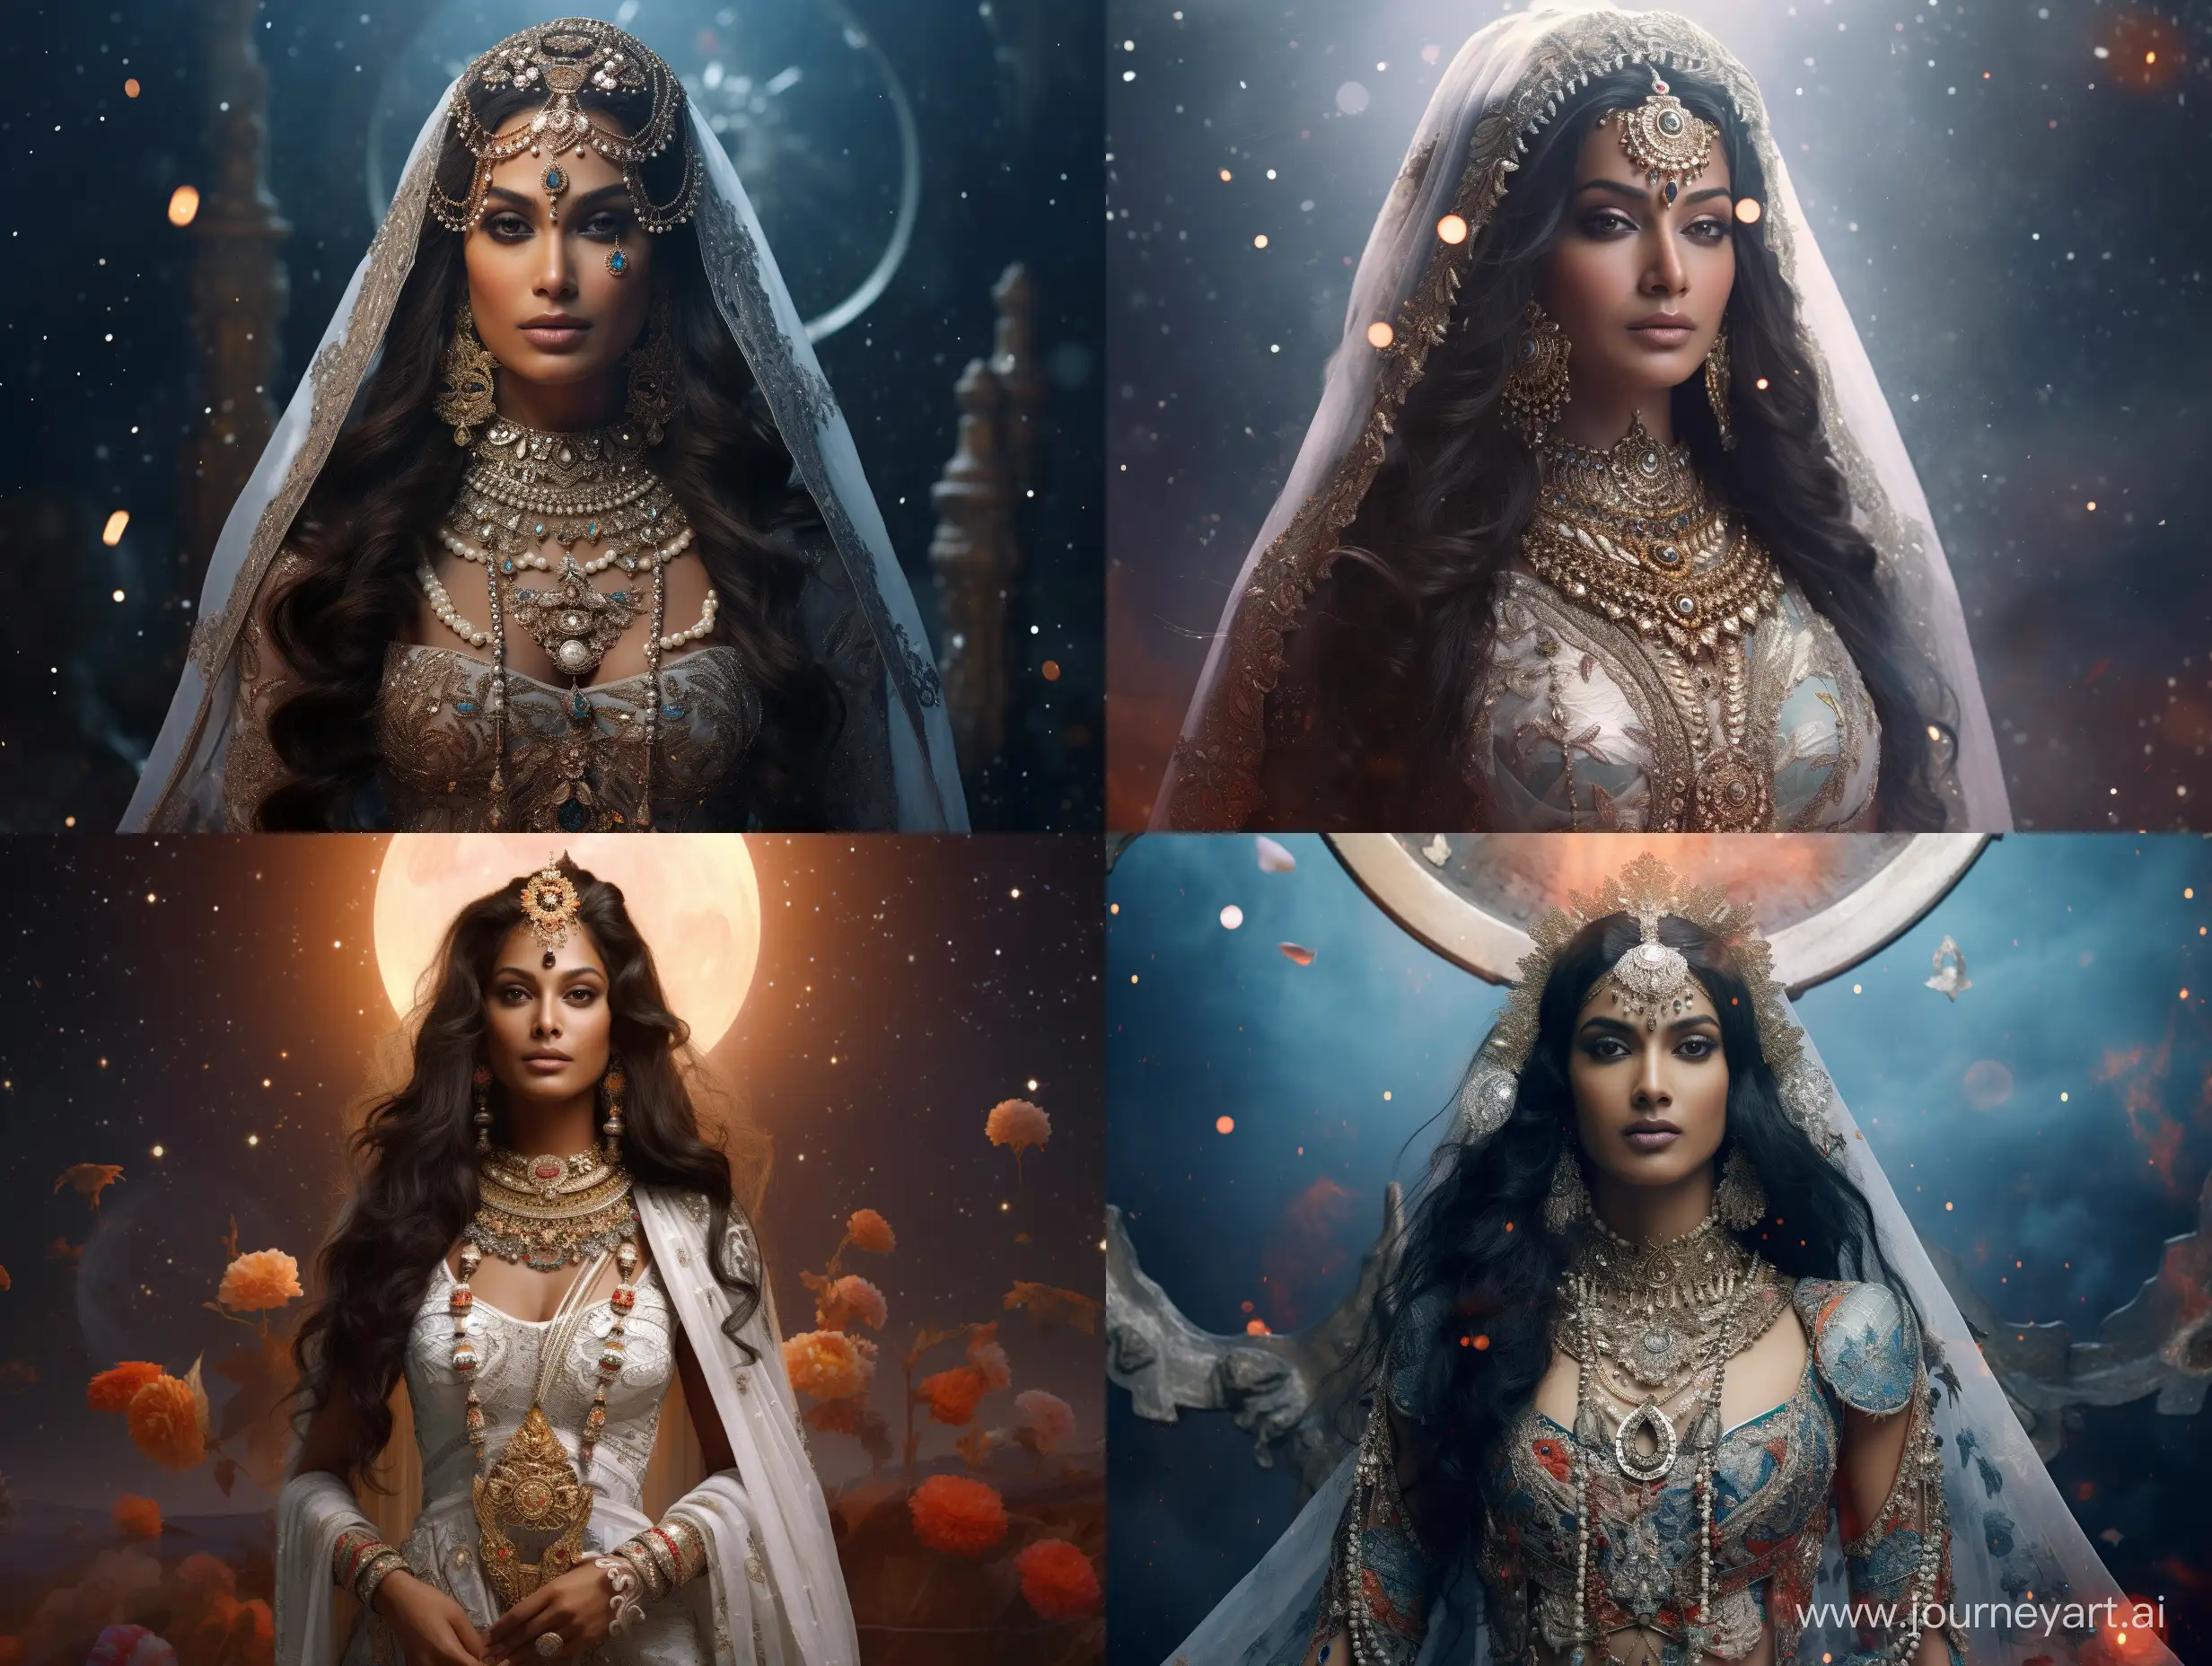 SpaceThemed-Indian-Bride-in-43-Aspect-Ratio